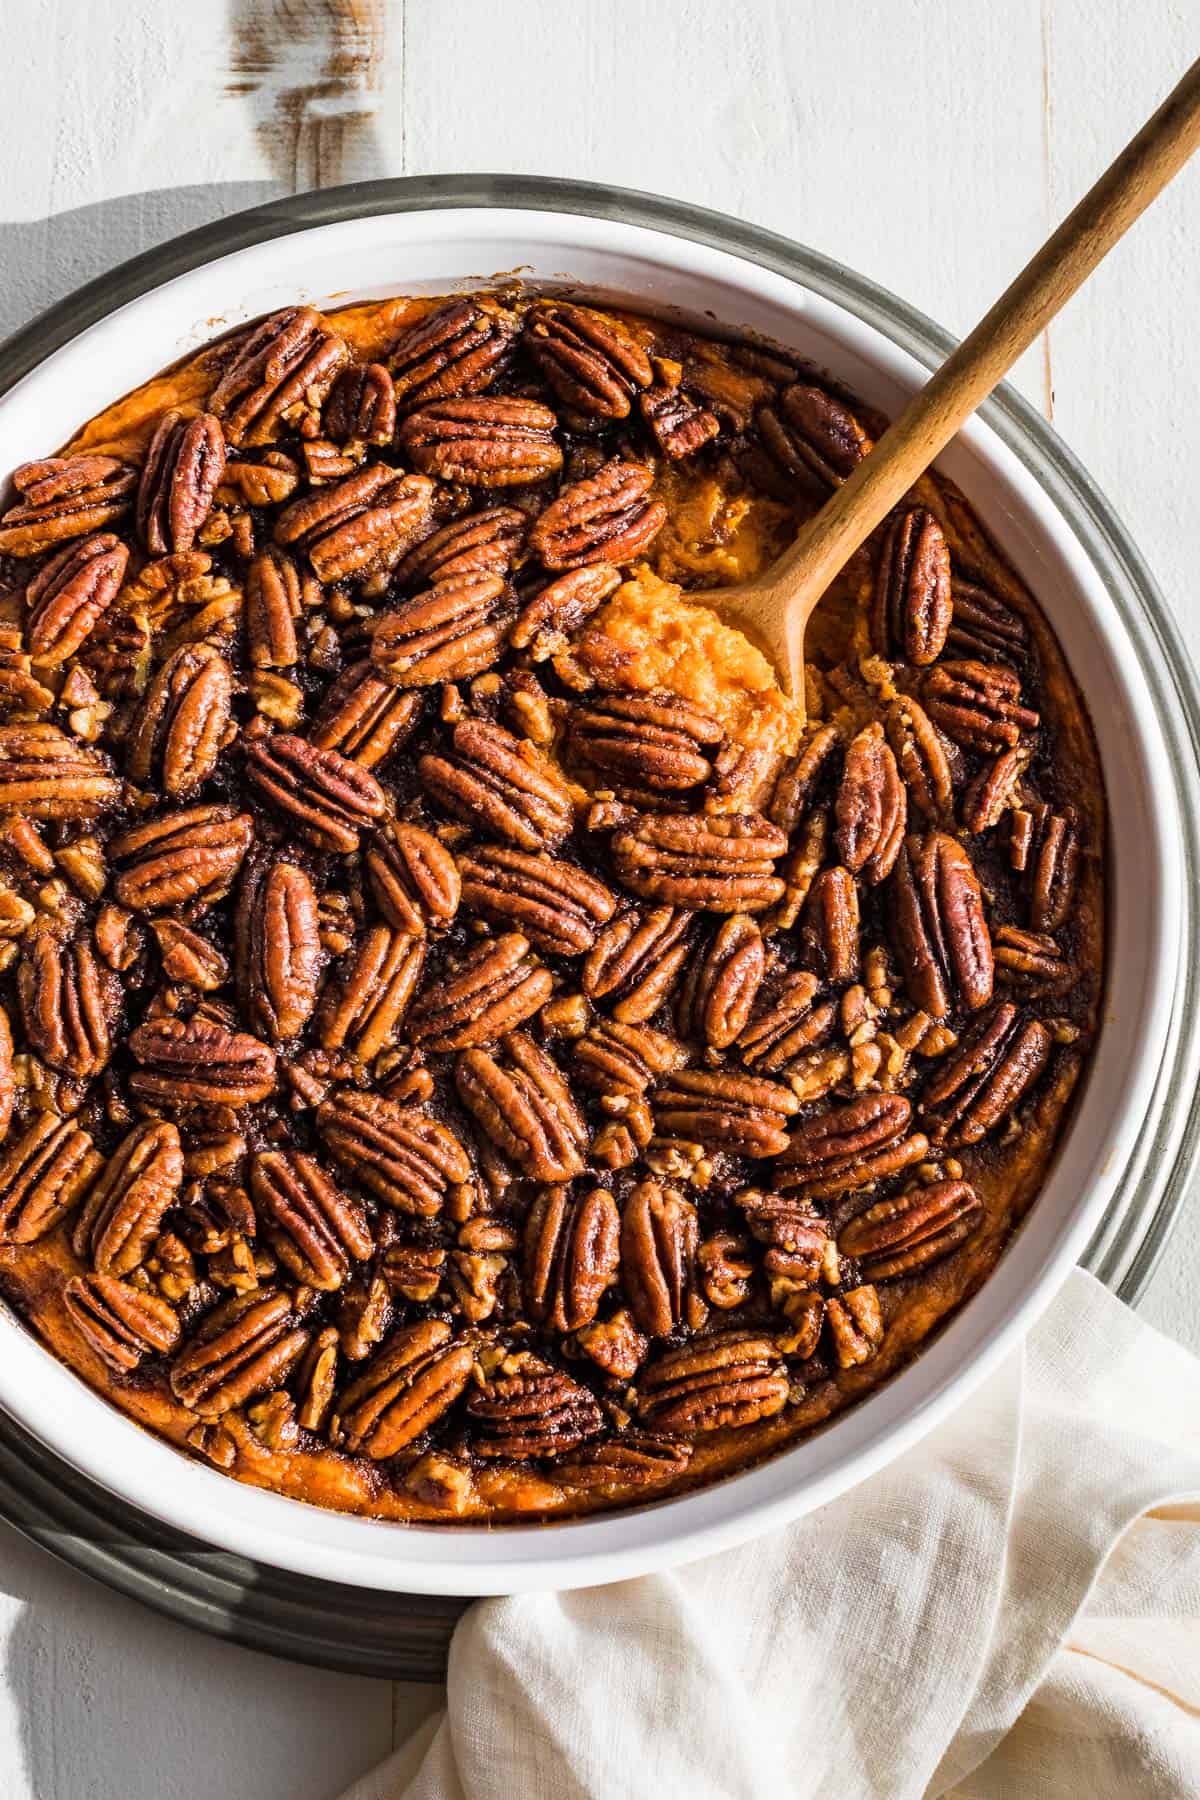 Sweet potato casserole topped with a pecan topping in a white baking dish with a wood spoon scooping out a bite.